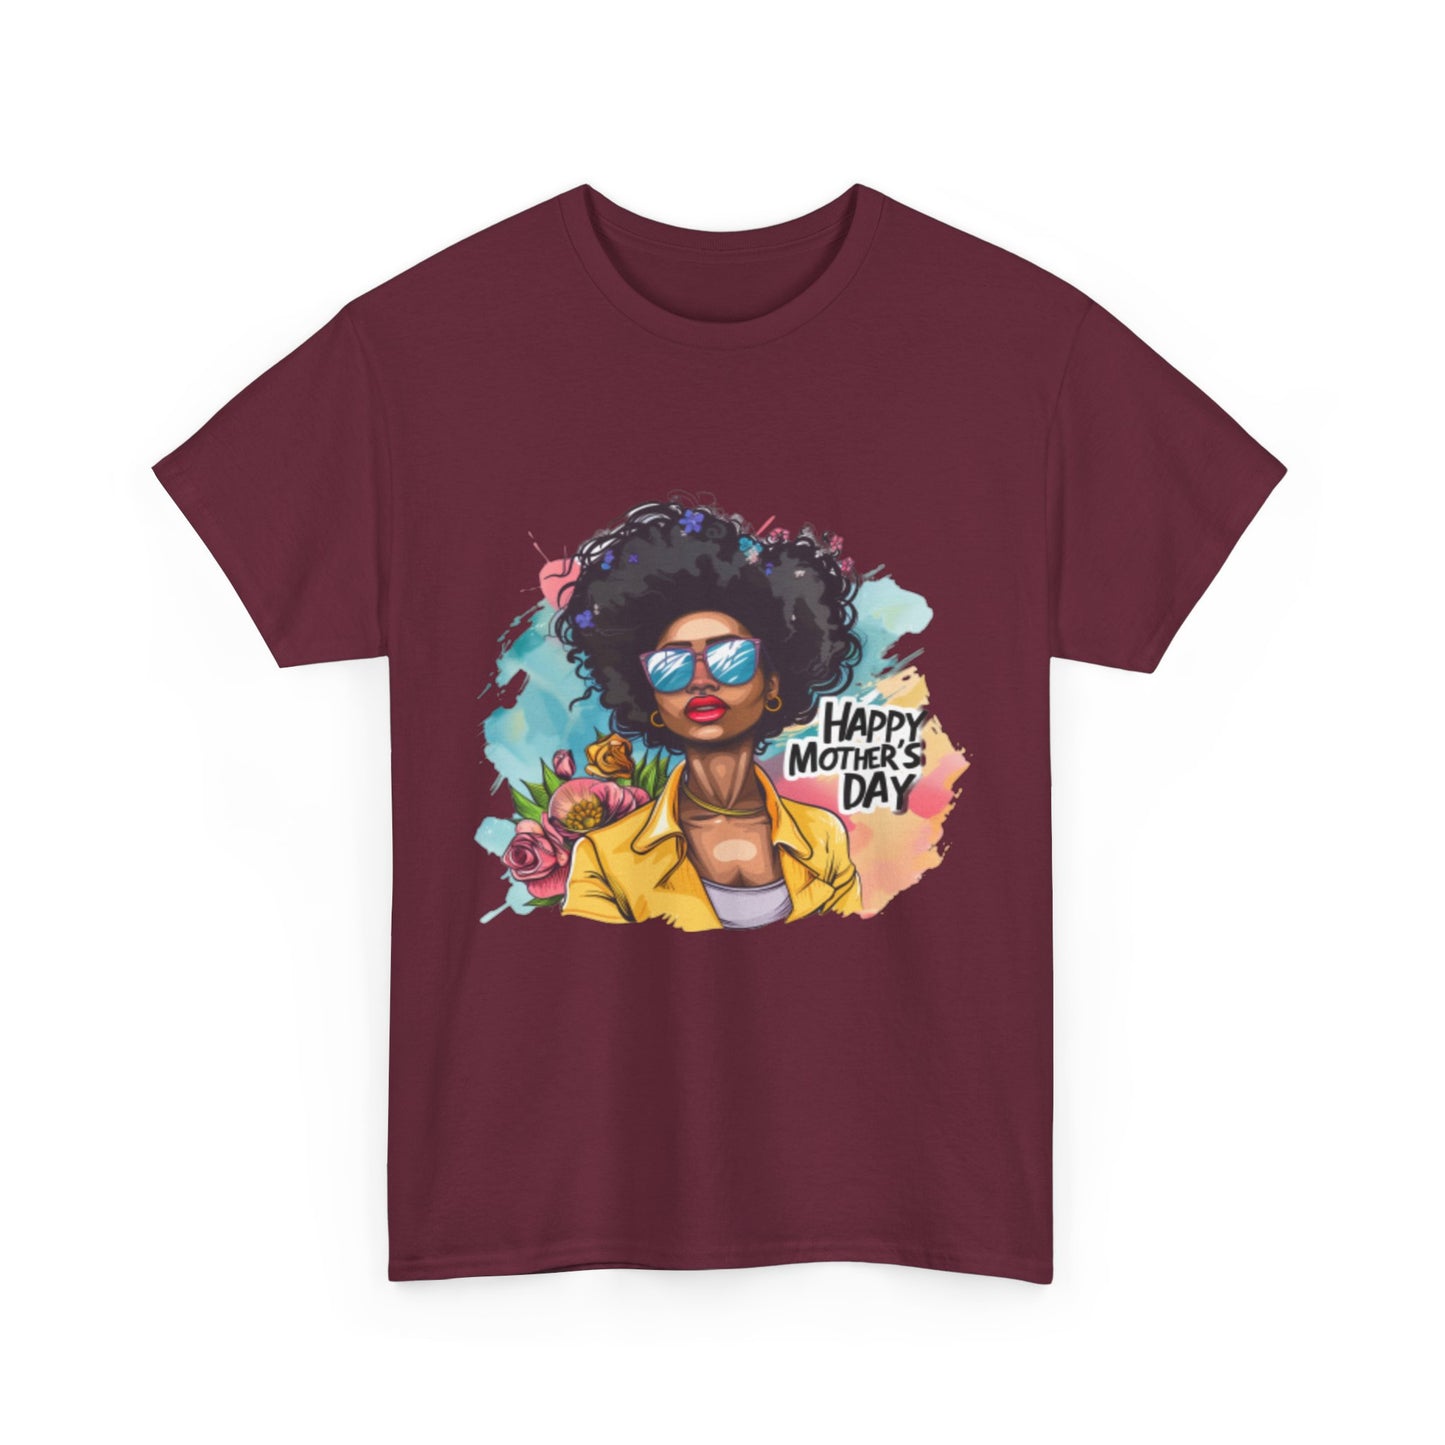 Happy Mother's Day African American Mom Graphic Unisex Heavy Cotton Tee Cotton Funny Humorous Graphic Soft Premium Unisex Men Women Maroon T-shirt Birthday Gift-27